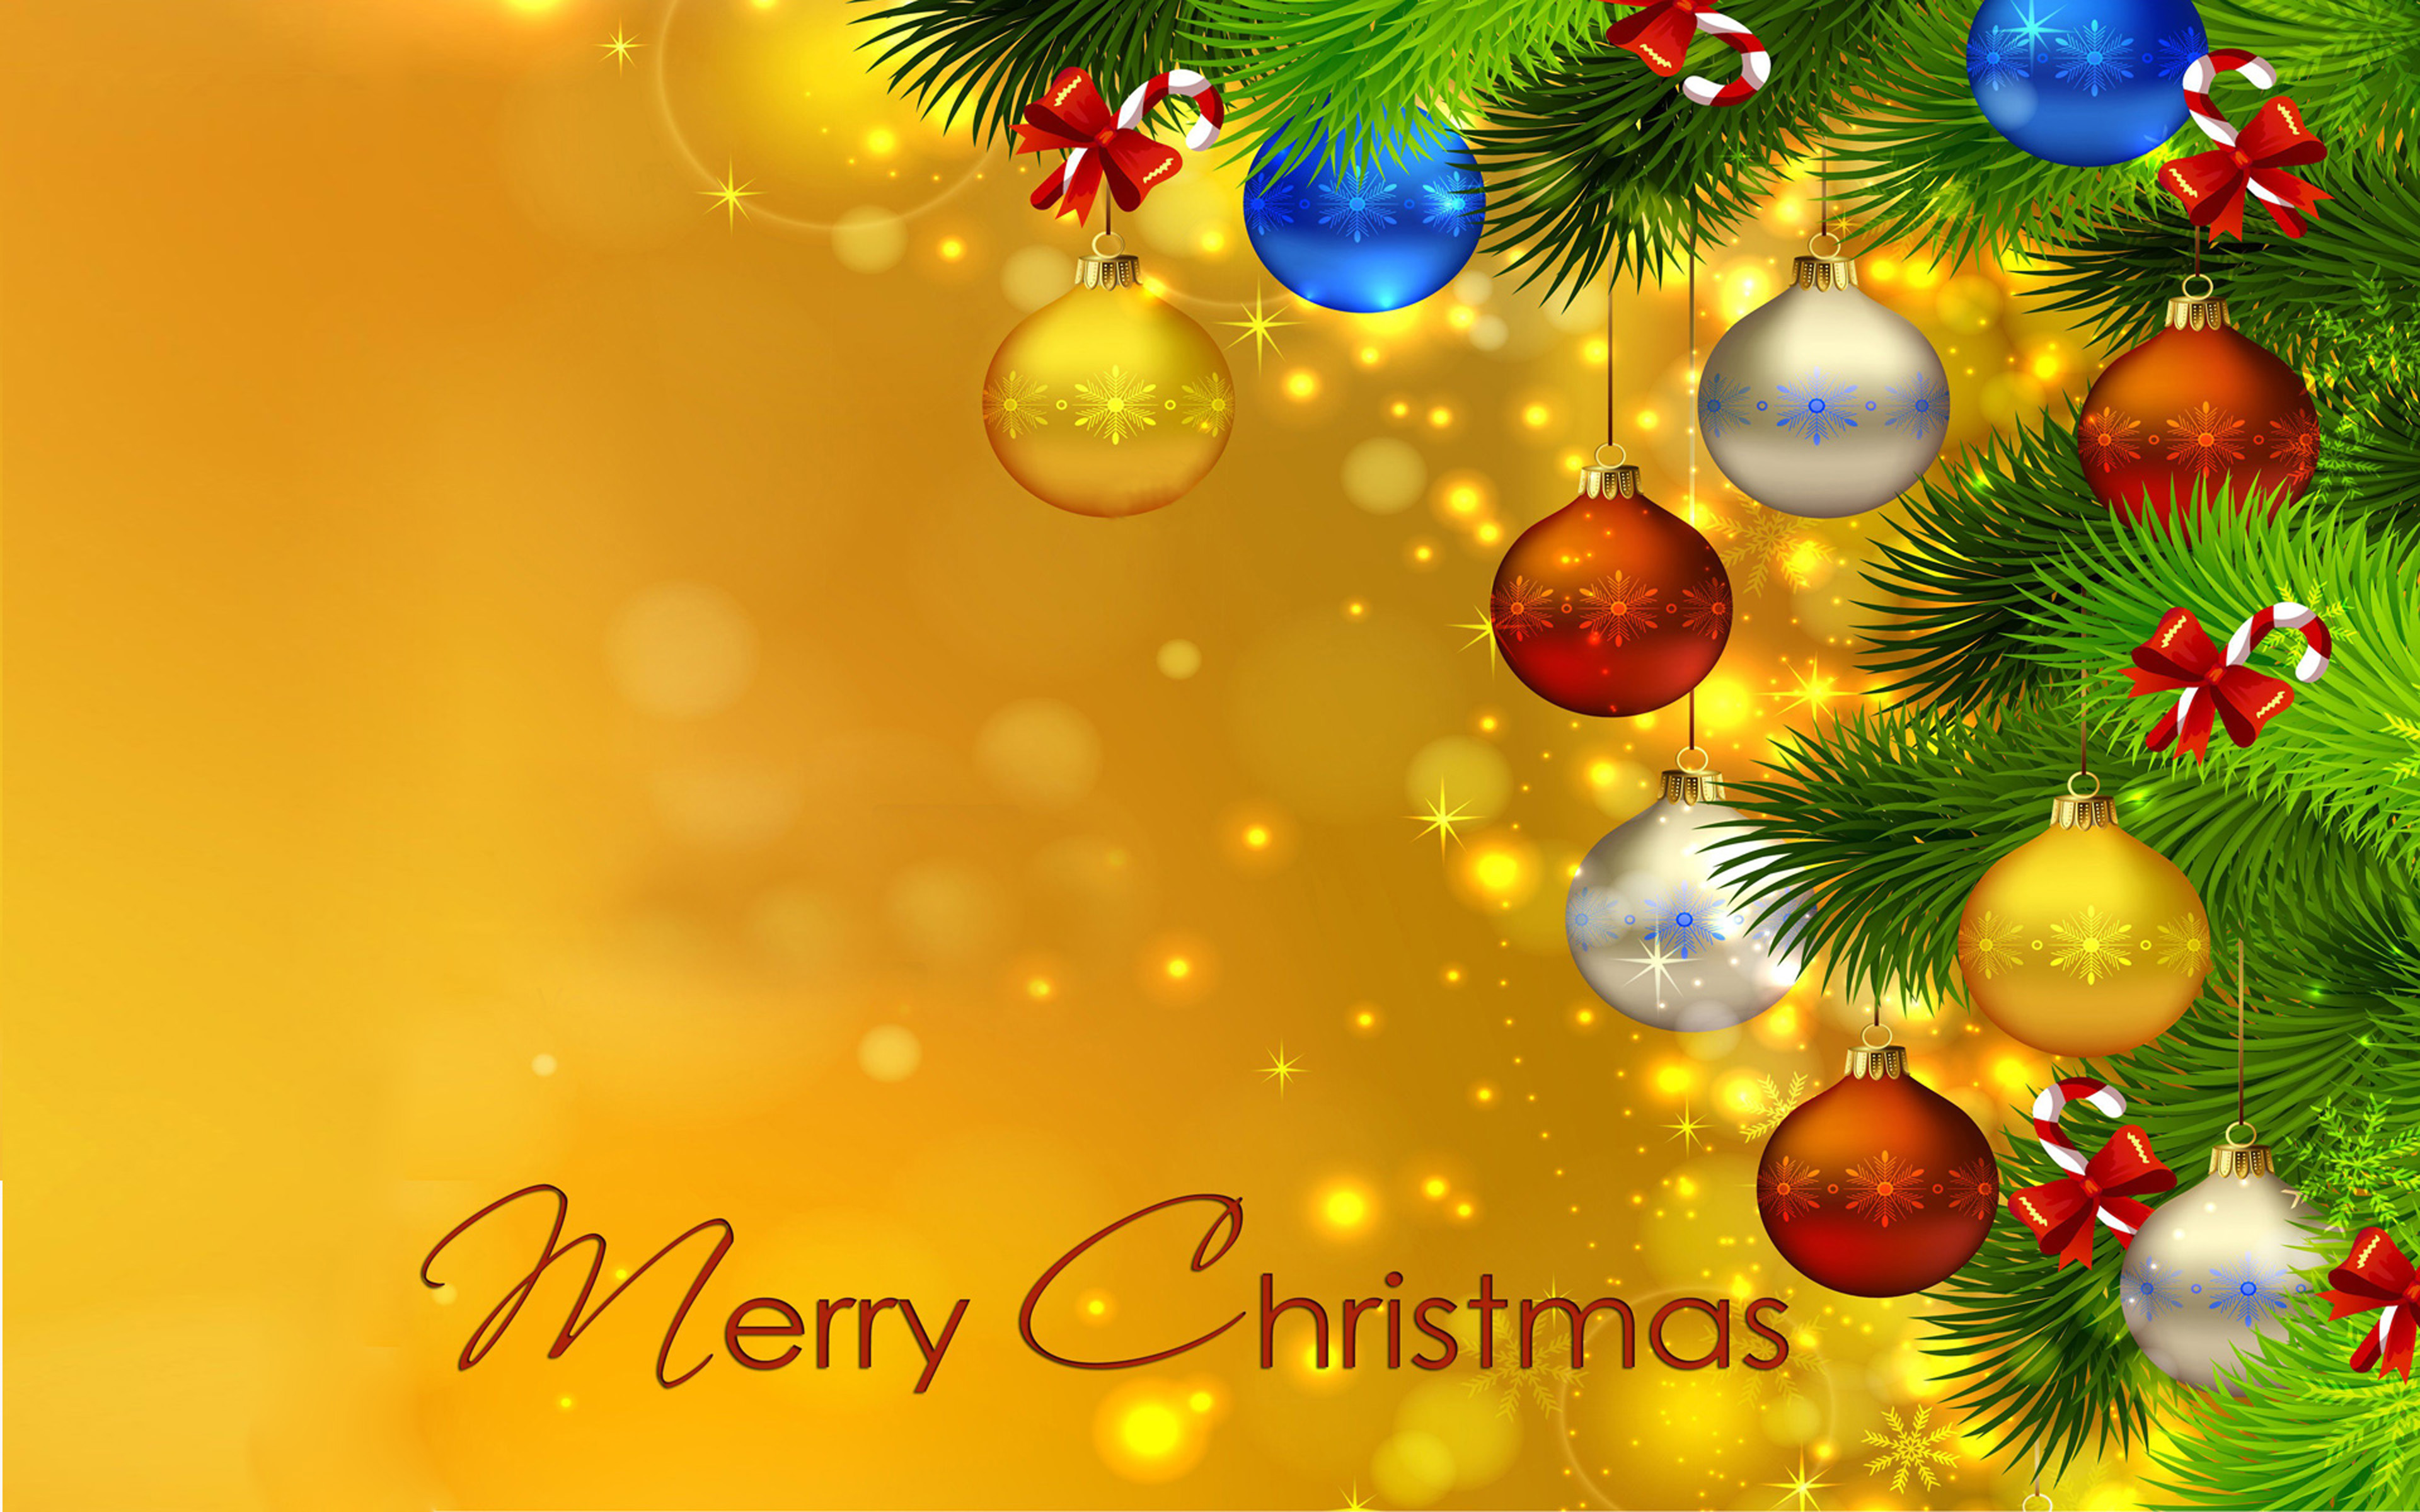 80 Background Christmas Wallpaper Images - MyWeb